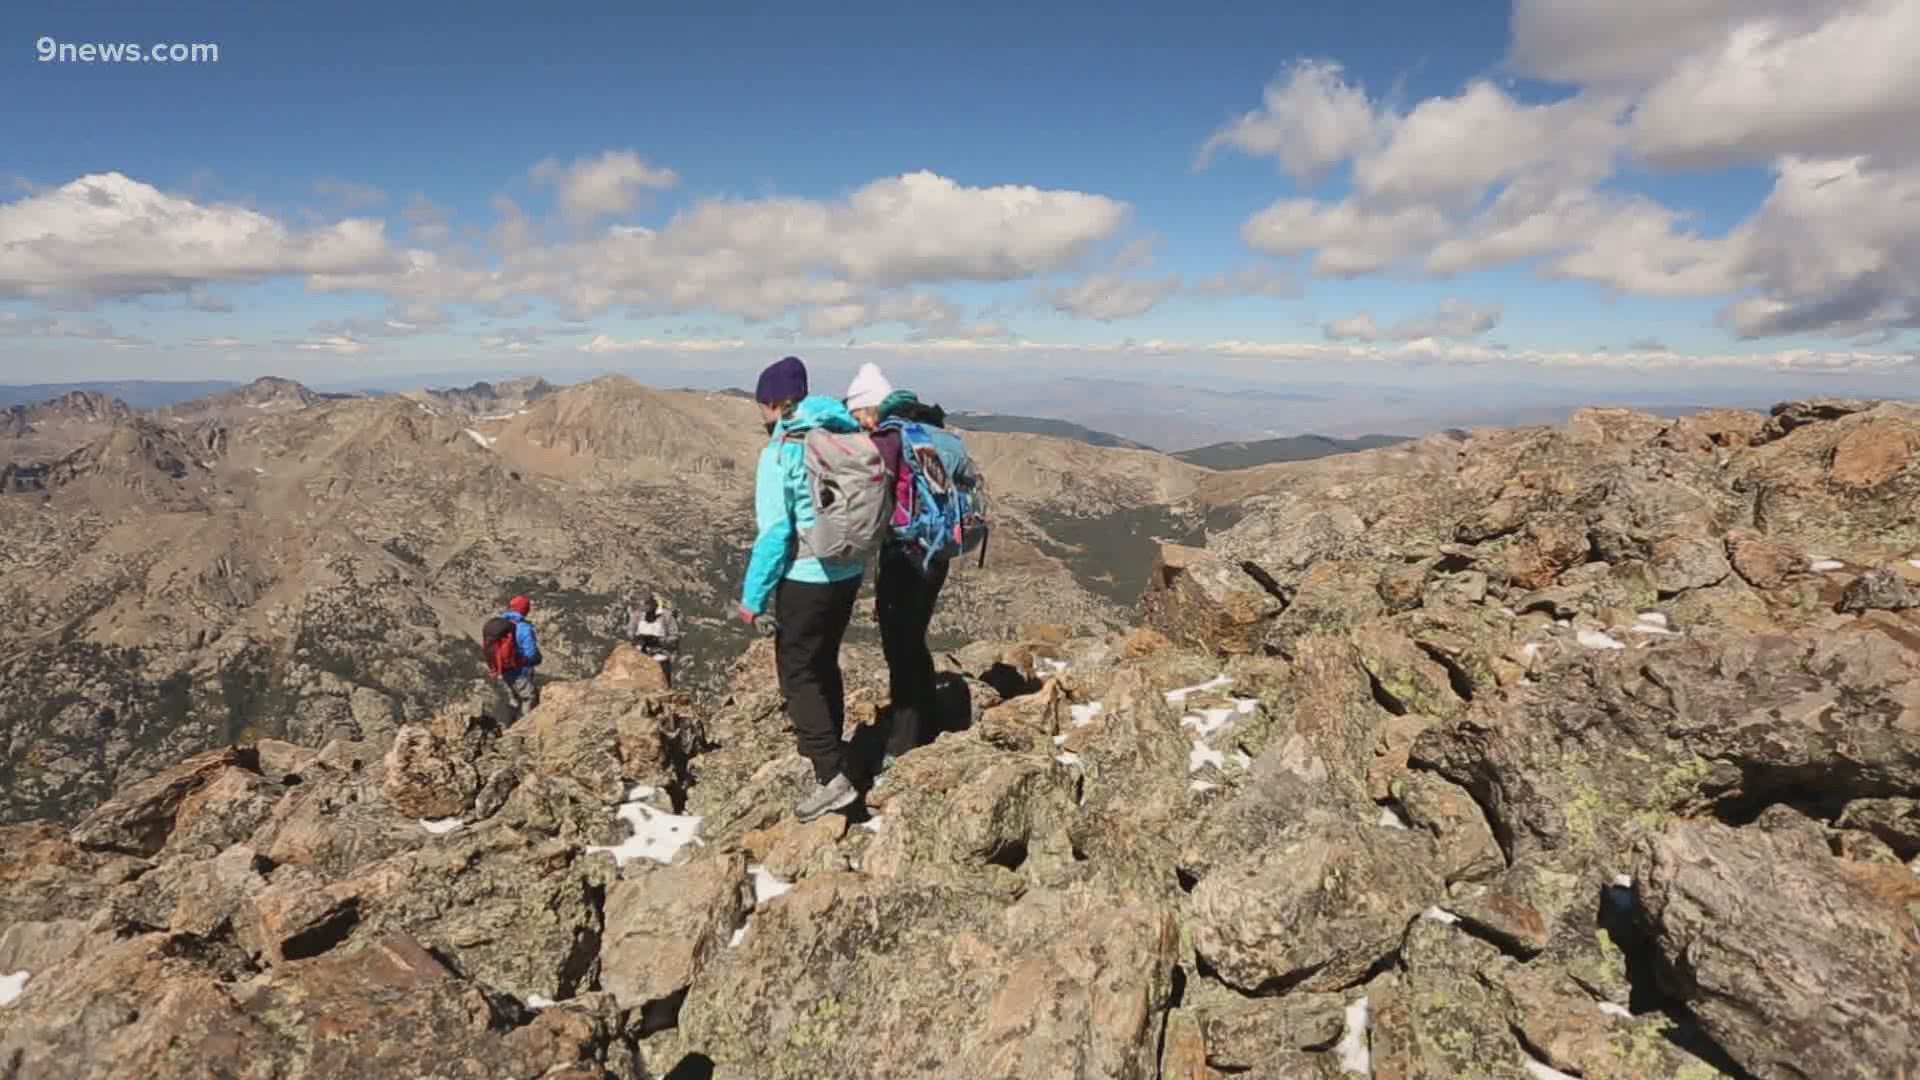 People are leaving everything from cardboard signs and toasters to dirty underwear on Colorado's 14ers.